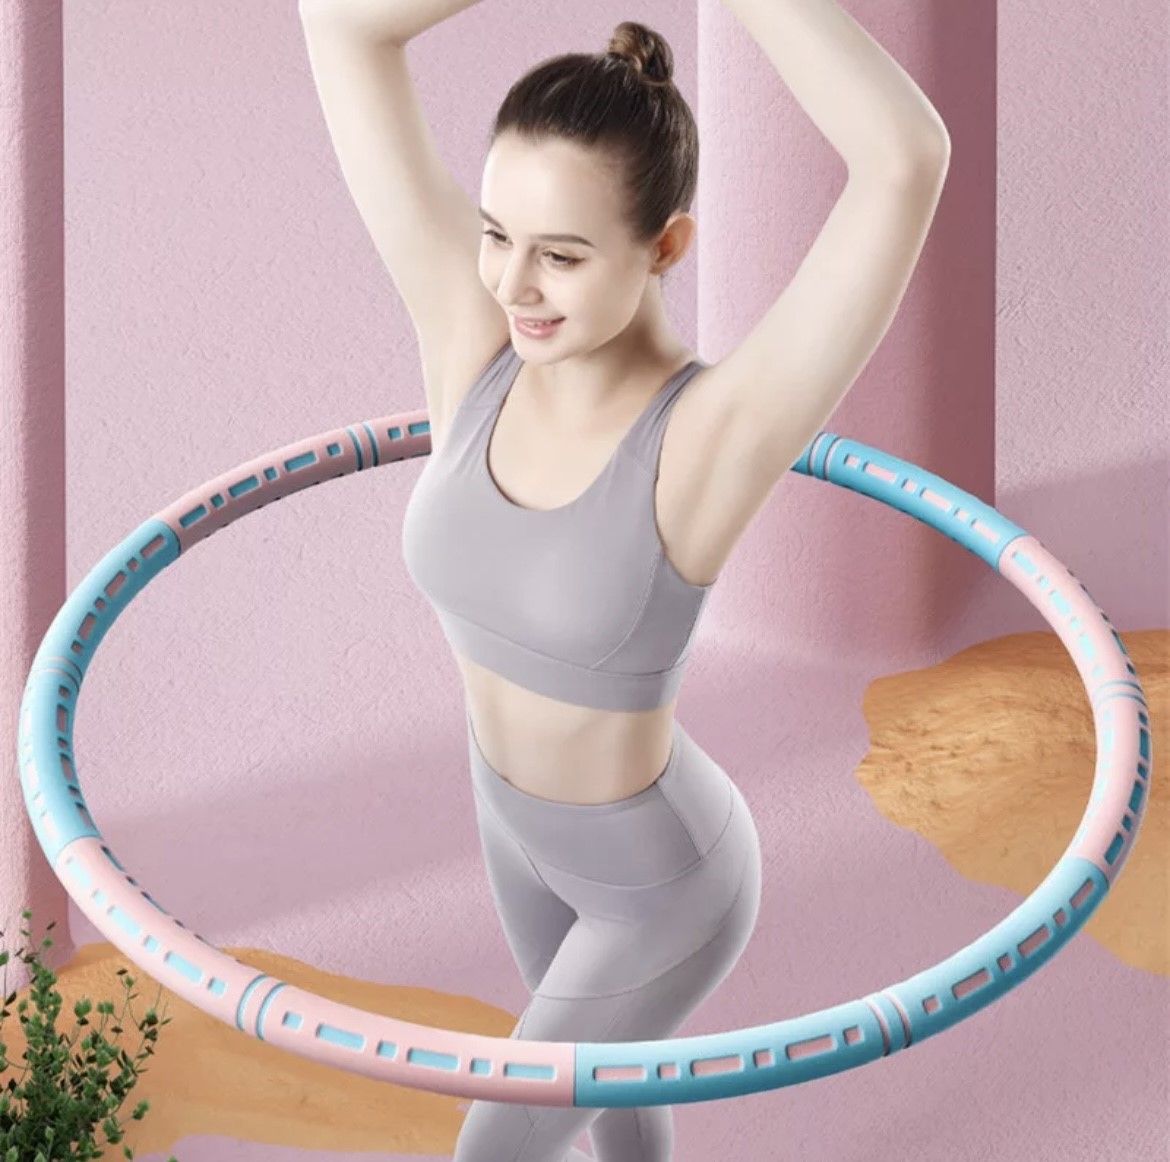 Removable Fitness Hoop Massage Foam Adult Weight Loss Training Equipment Sturdy And Soft Bodybuilding Exercise Hula Circle